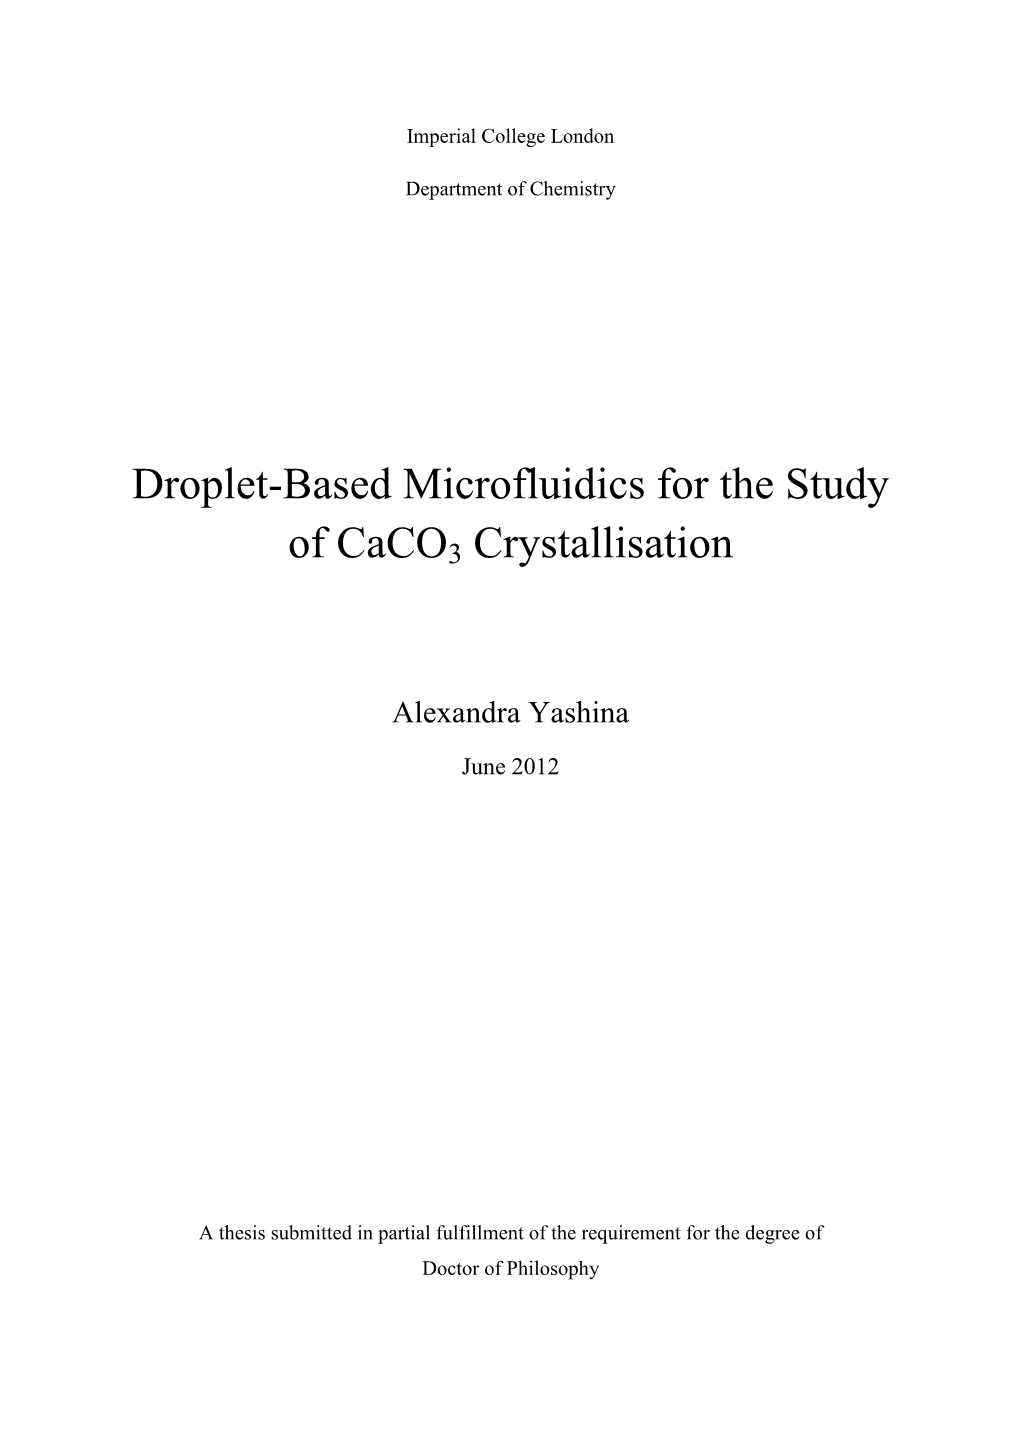 Droplet-Based Microfluidics for the Study of Caco3 Crystallisation